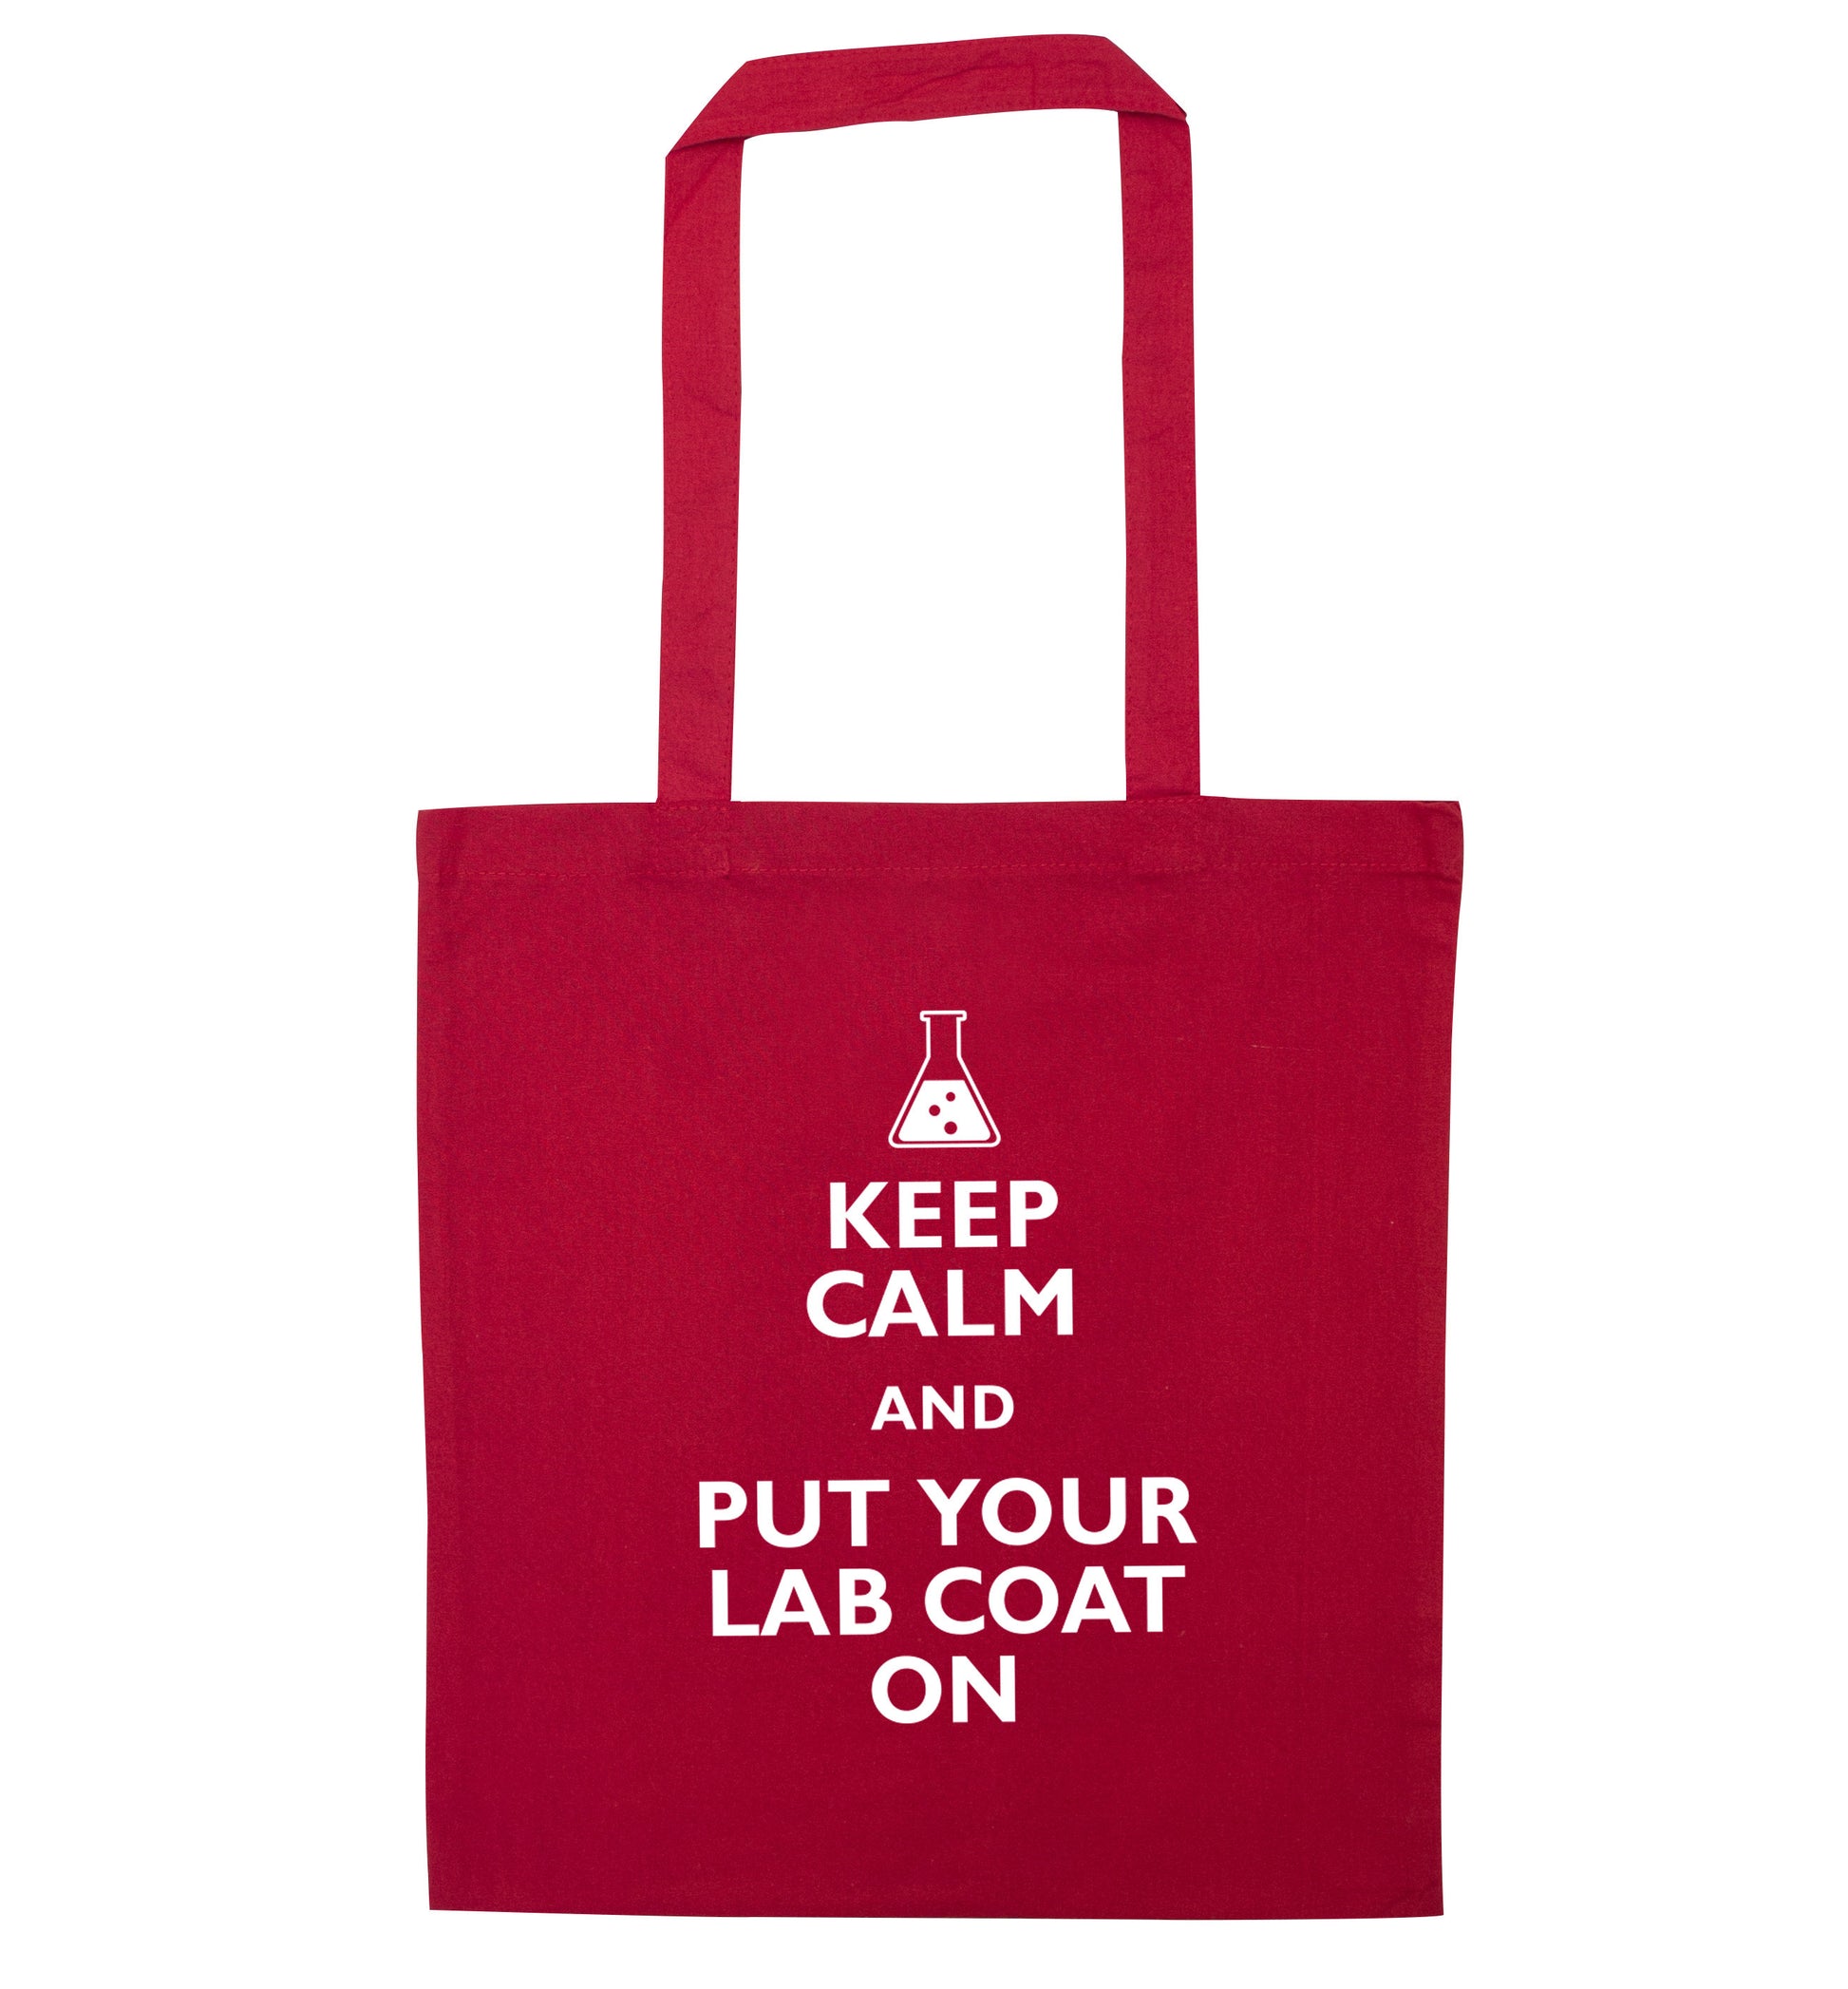 Keep calm and put your lab coat on red tote bag